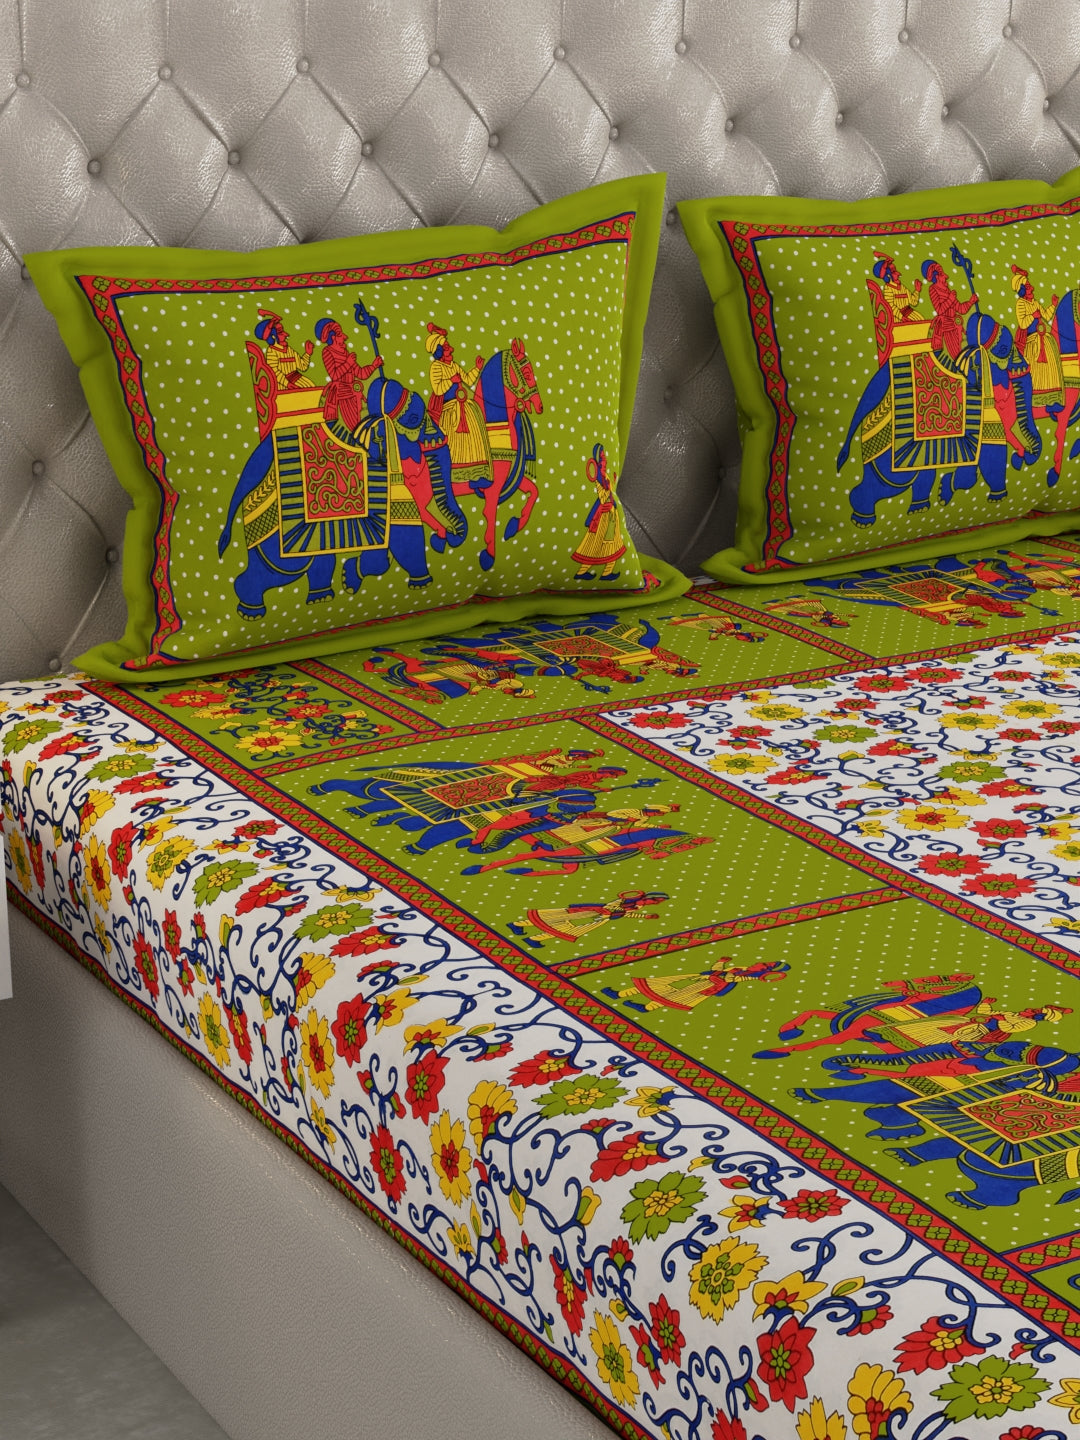 330 TC Super Jaipuri Print King Size Double Bedsheet Made up of 100% Cotton fabric with Two Pillow Covers._4